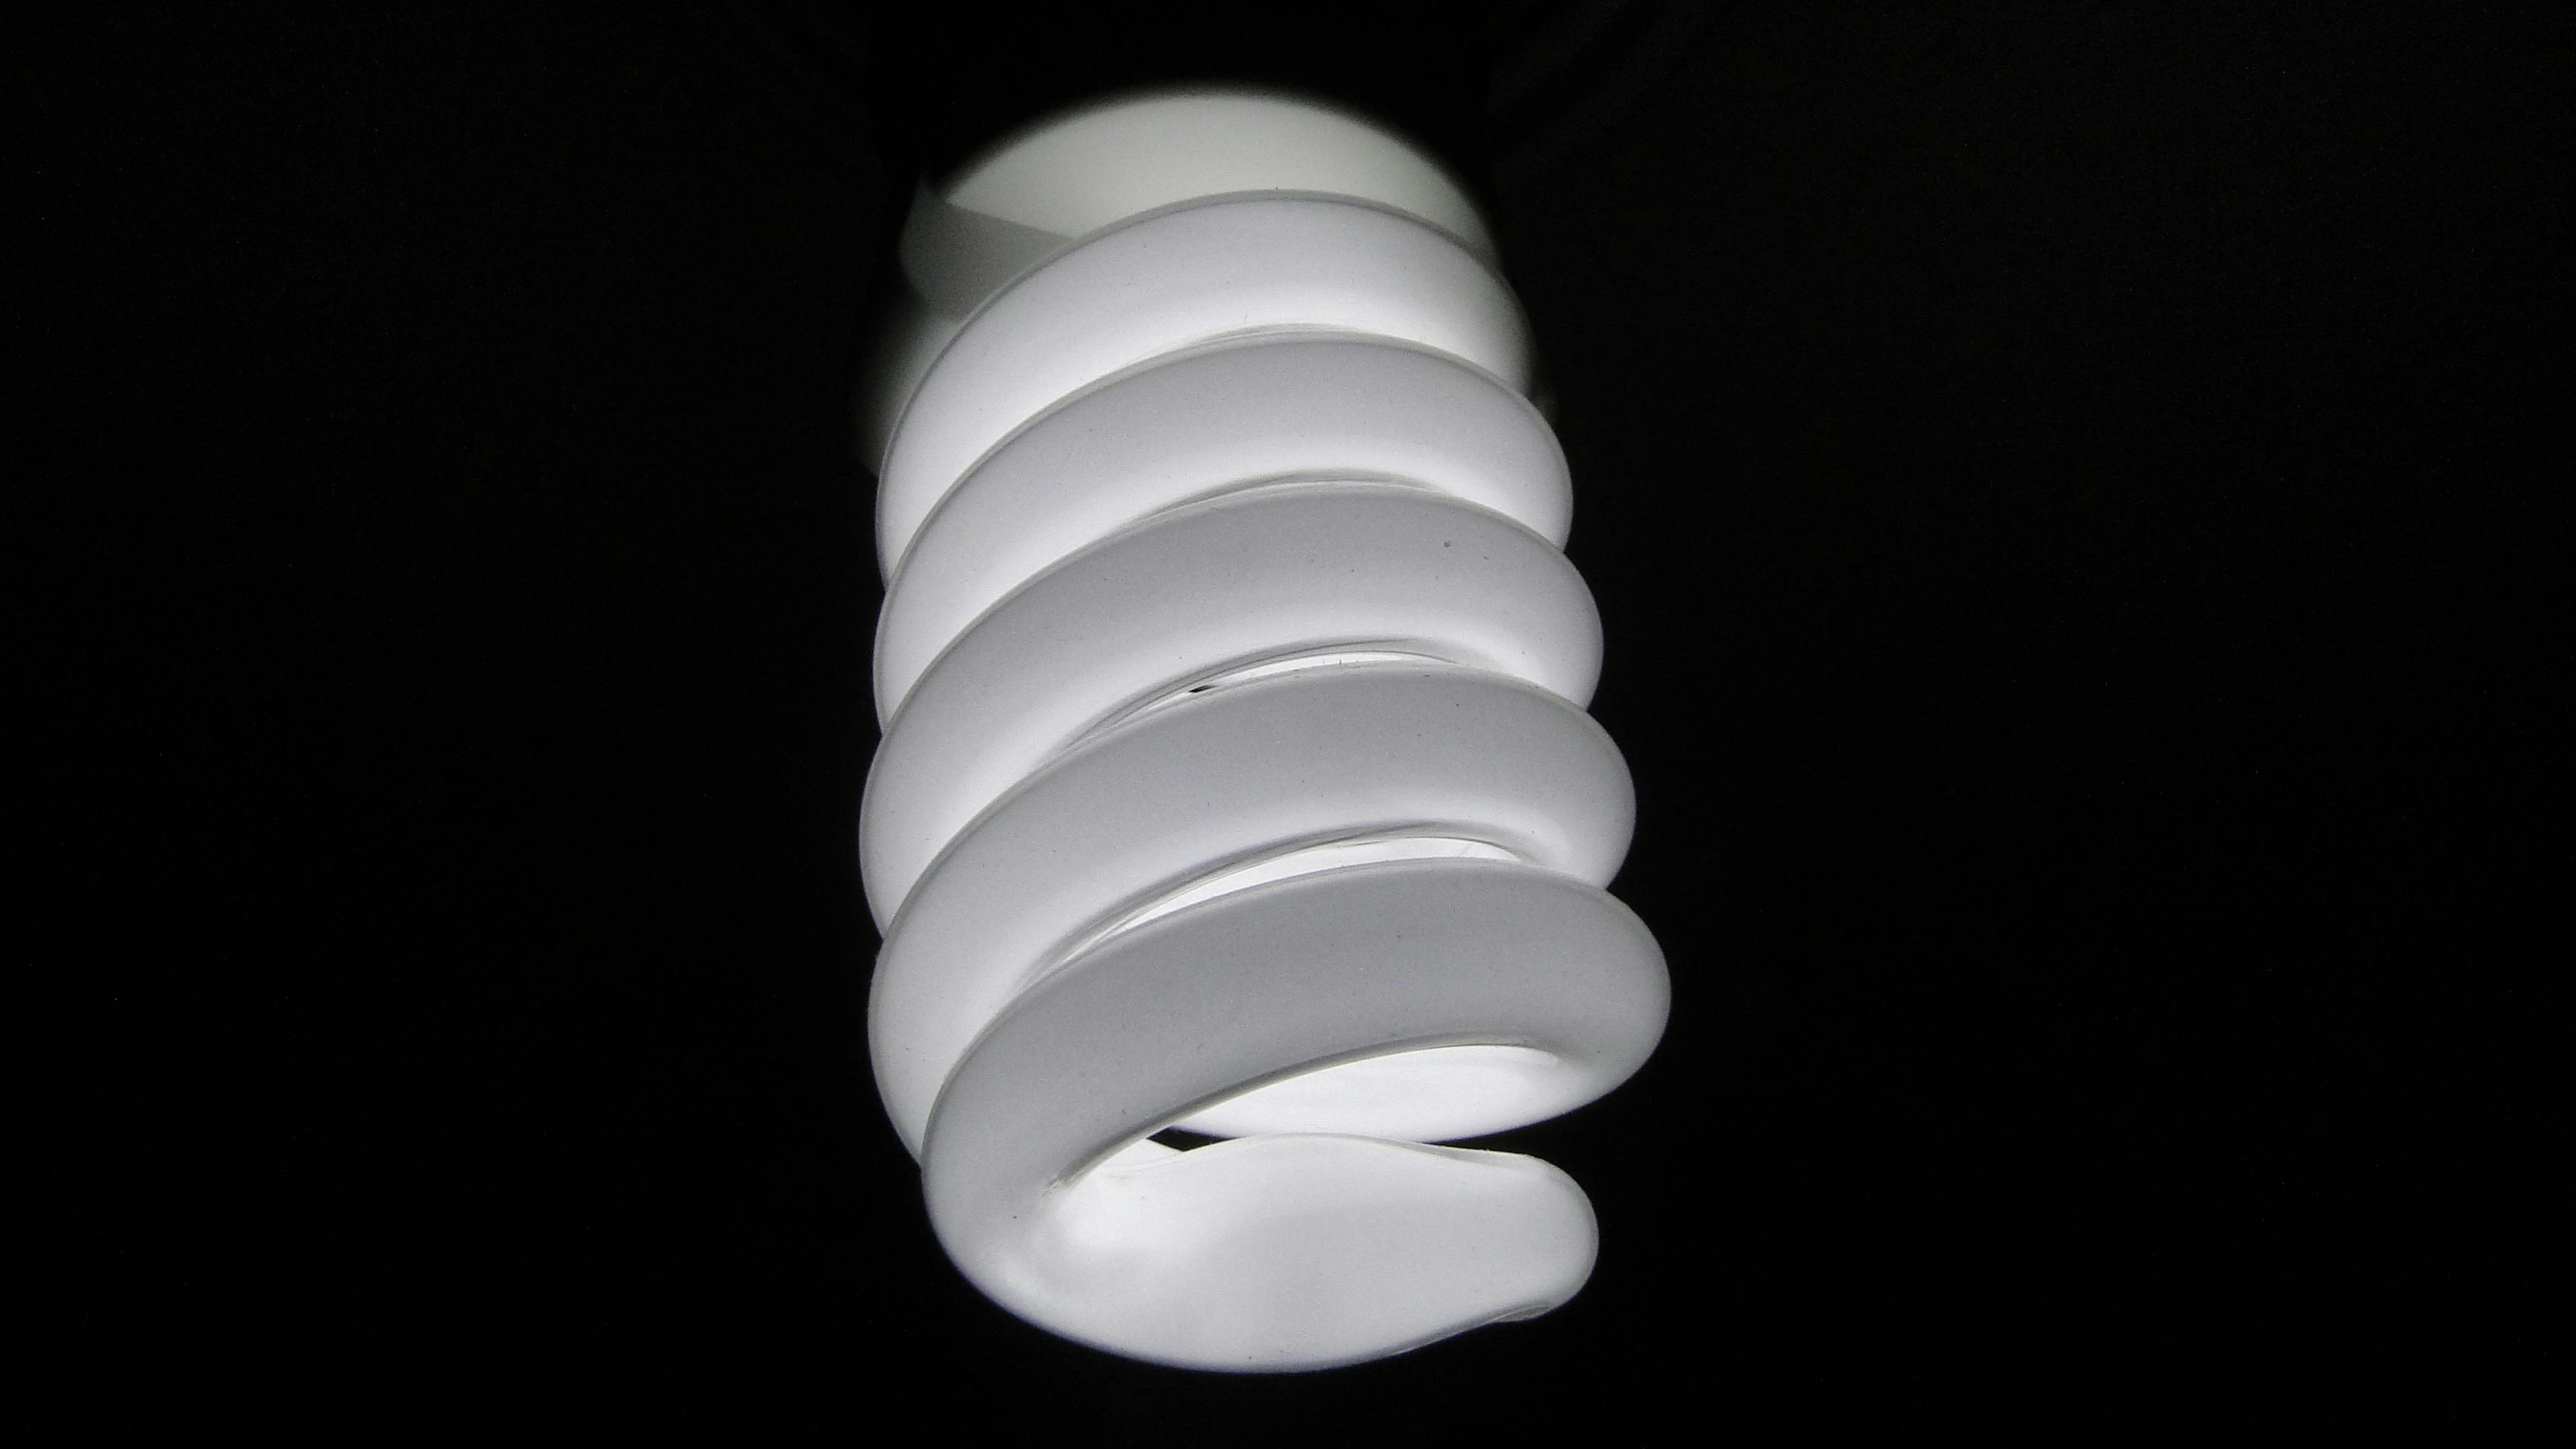 Led bulb wallpaper Cut Out Stock Images & Pictures - Alamy